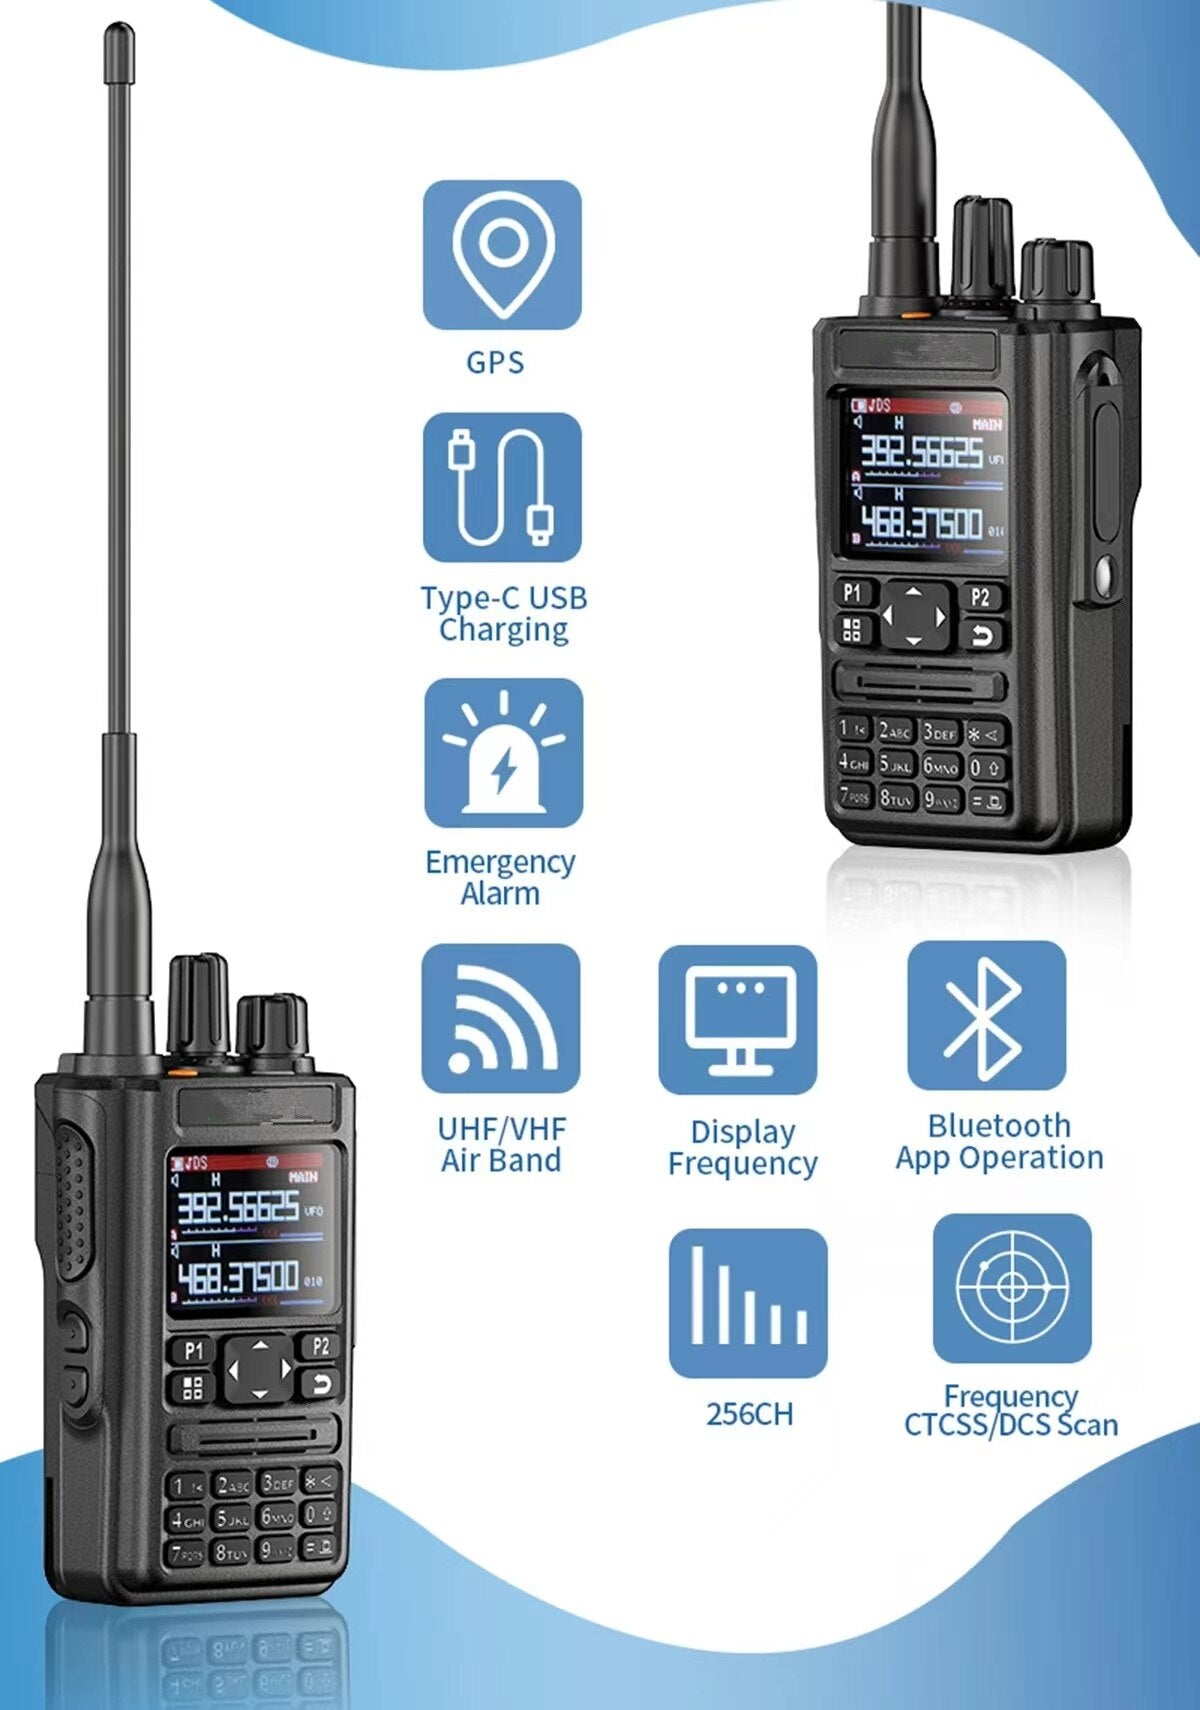 Full Air Band 65-520 Walkie Talkie Outdoor Radio Station GPS Bluetooth APP Match Any Intercom Frequency HAM Interphone Free Call